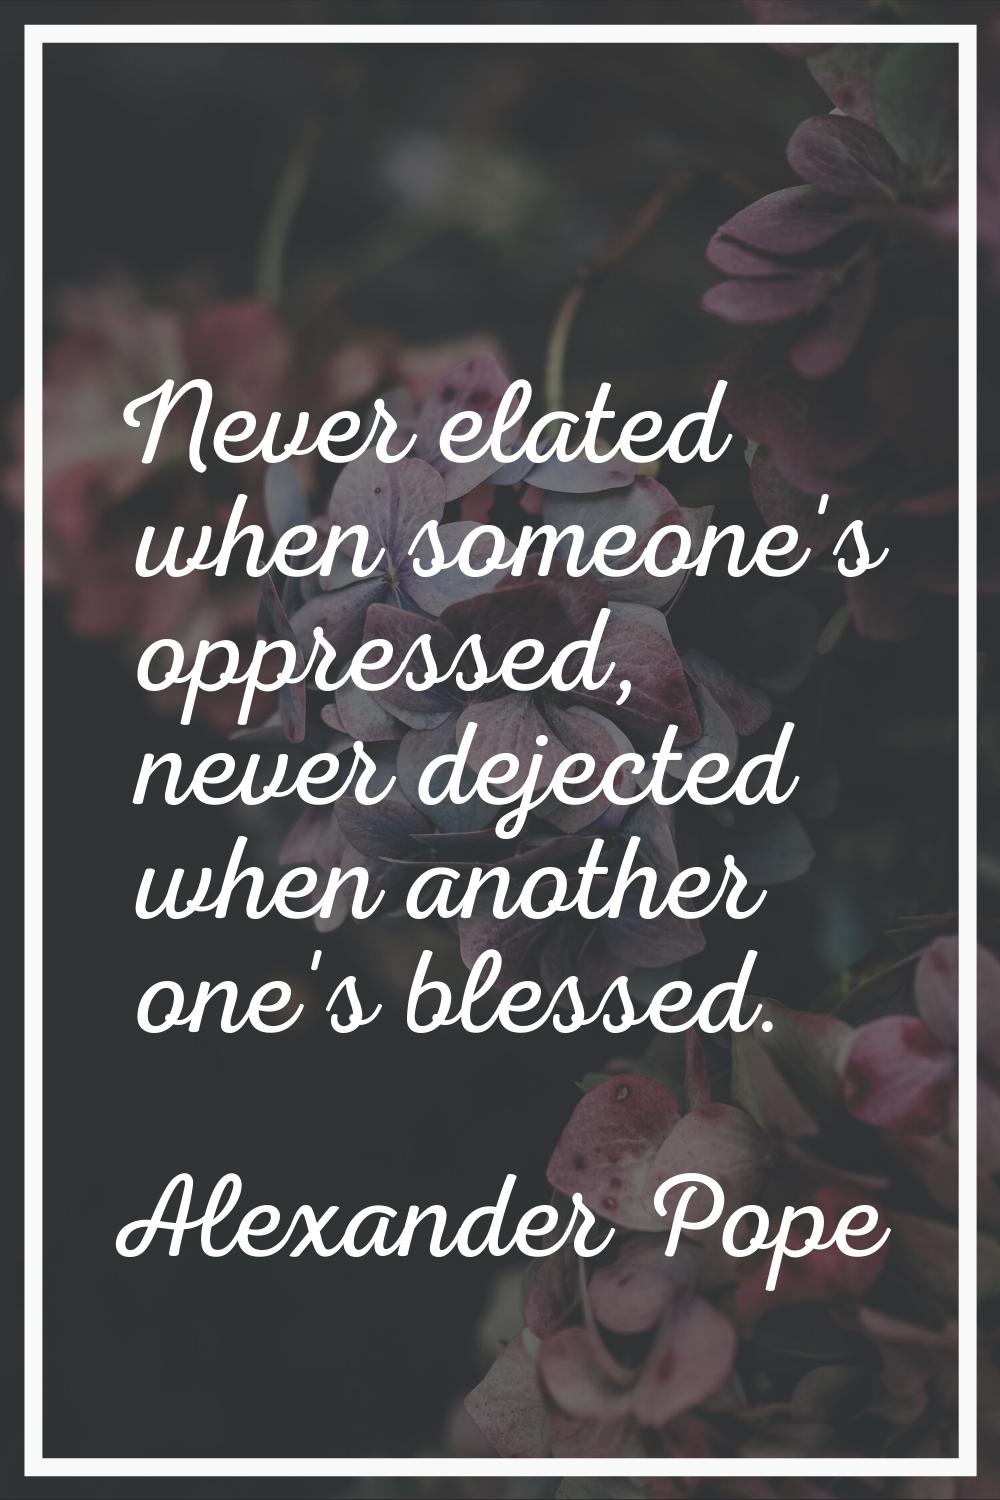 Never elated when someone's oppressed, never dejected when another one's blessed.